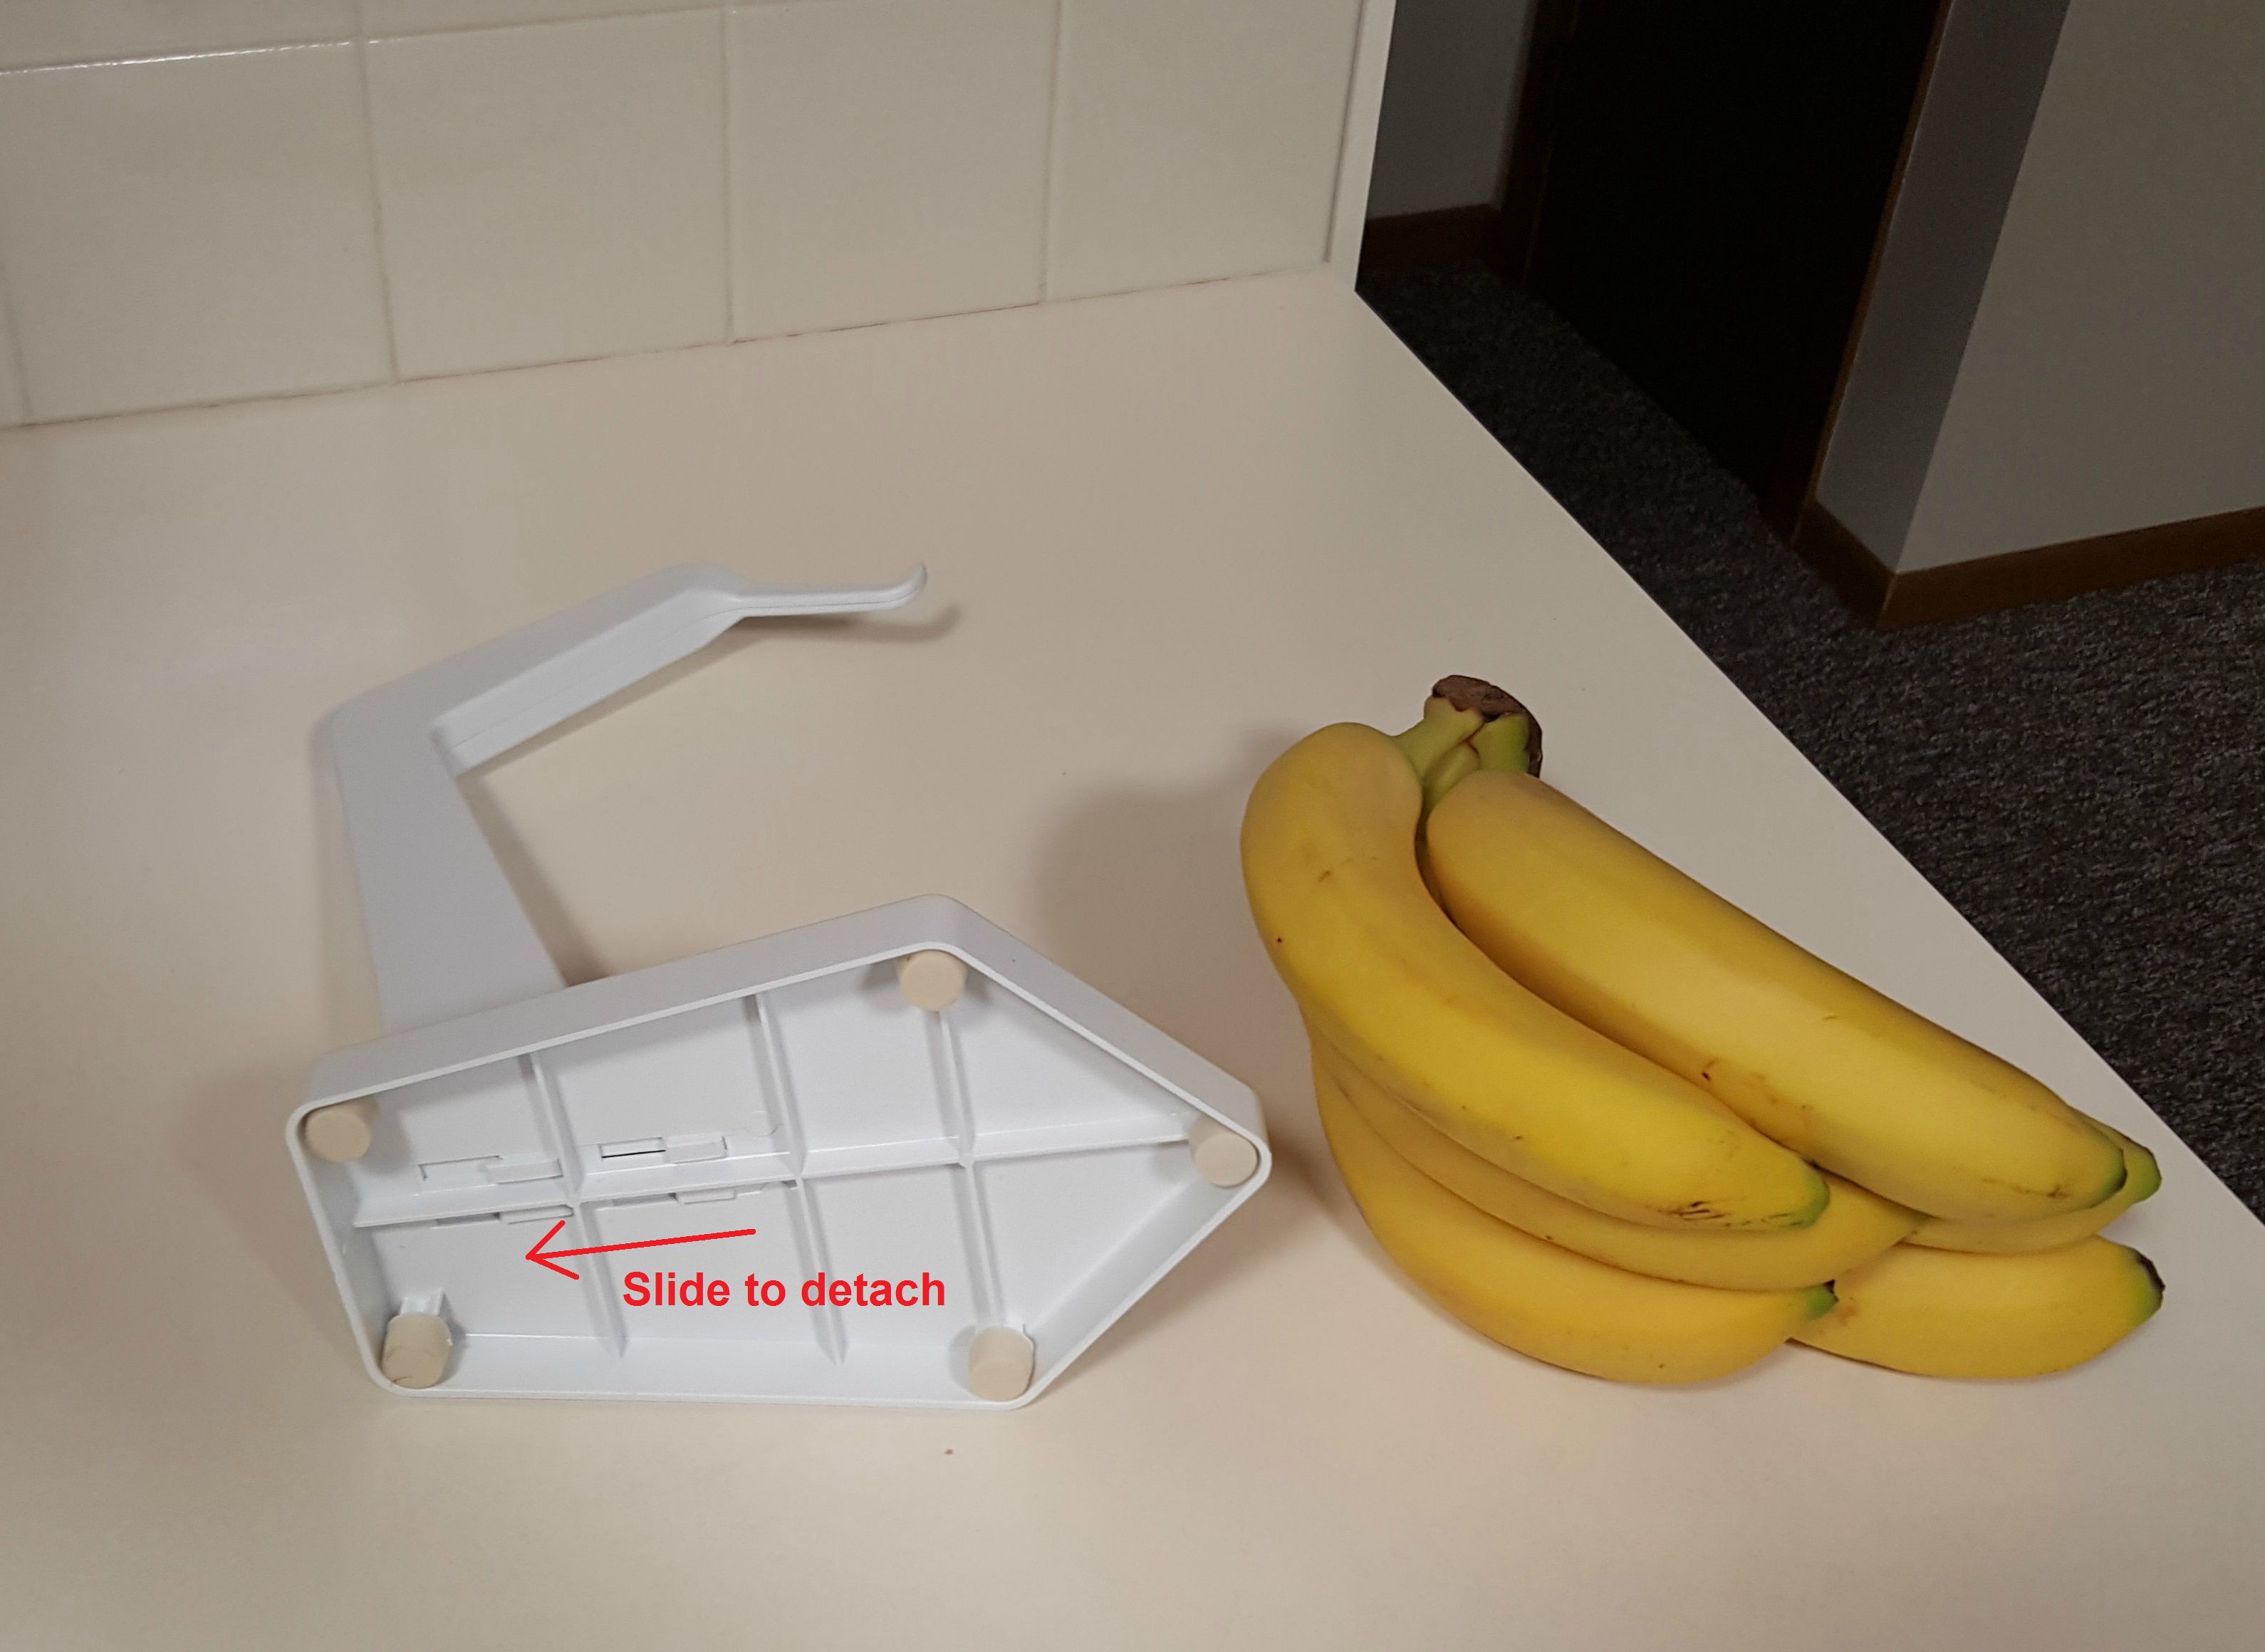 Step Two: Remove scales. Bananas aren't a dinner food. Focus on the thing they were hanging from.